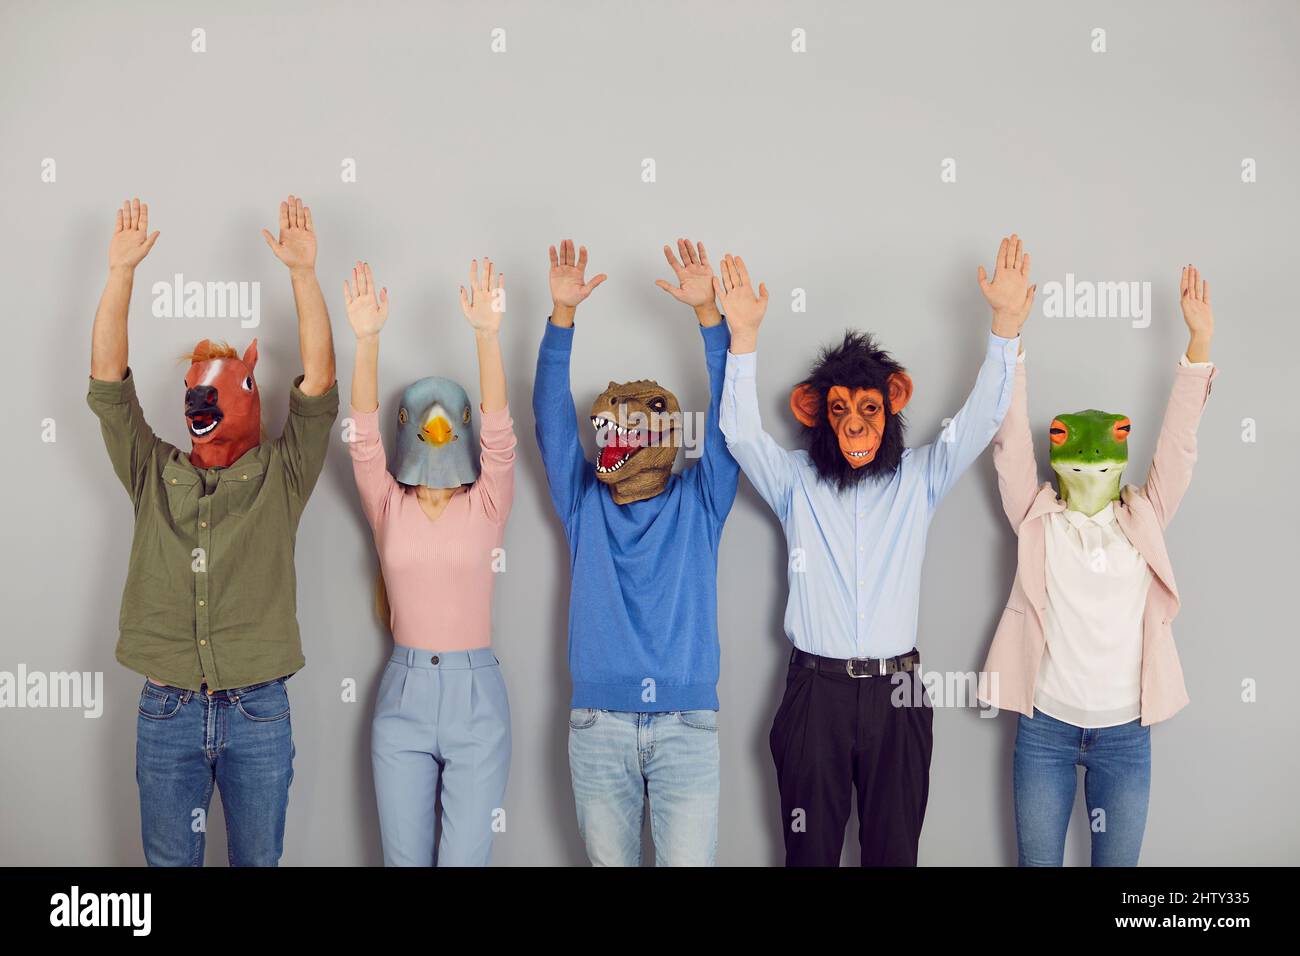 Team of young people in different funny animal masks standing together and raising their hands up Stock Photo